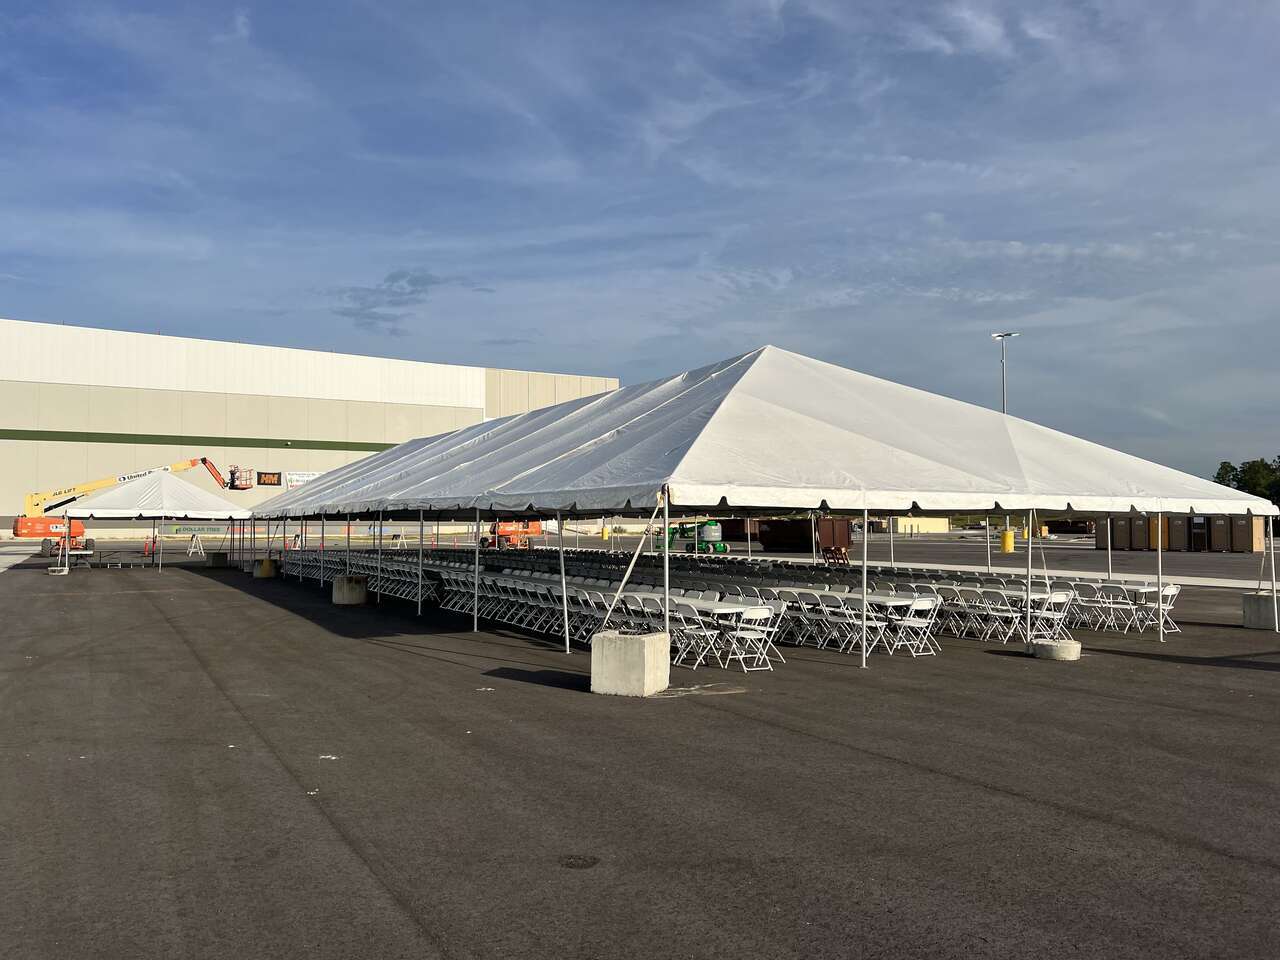 A large white event tent set up in a spacious outdoor area with rows of metal folding chairs neatly arranged underneath, ready for an event in Ocala, FL. The tent rental, provided by Rebound Party Rentals, showcases their capability to accommodate gatherings of significant size with professional setup.